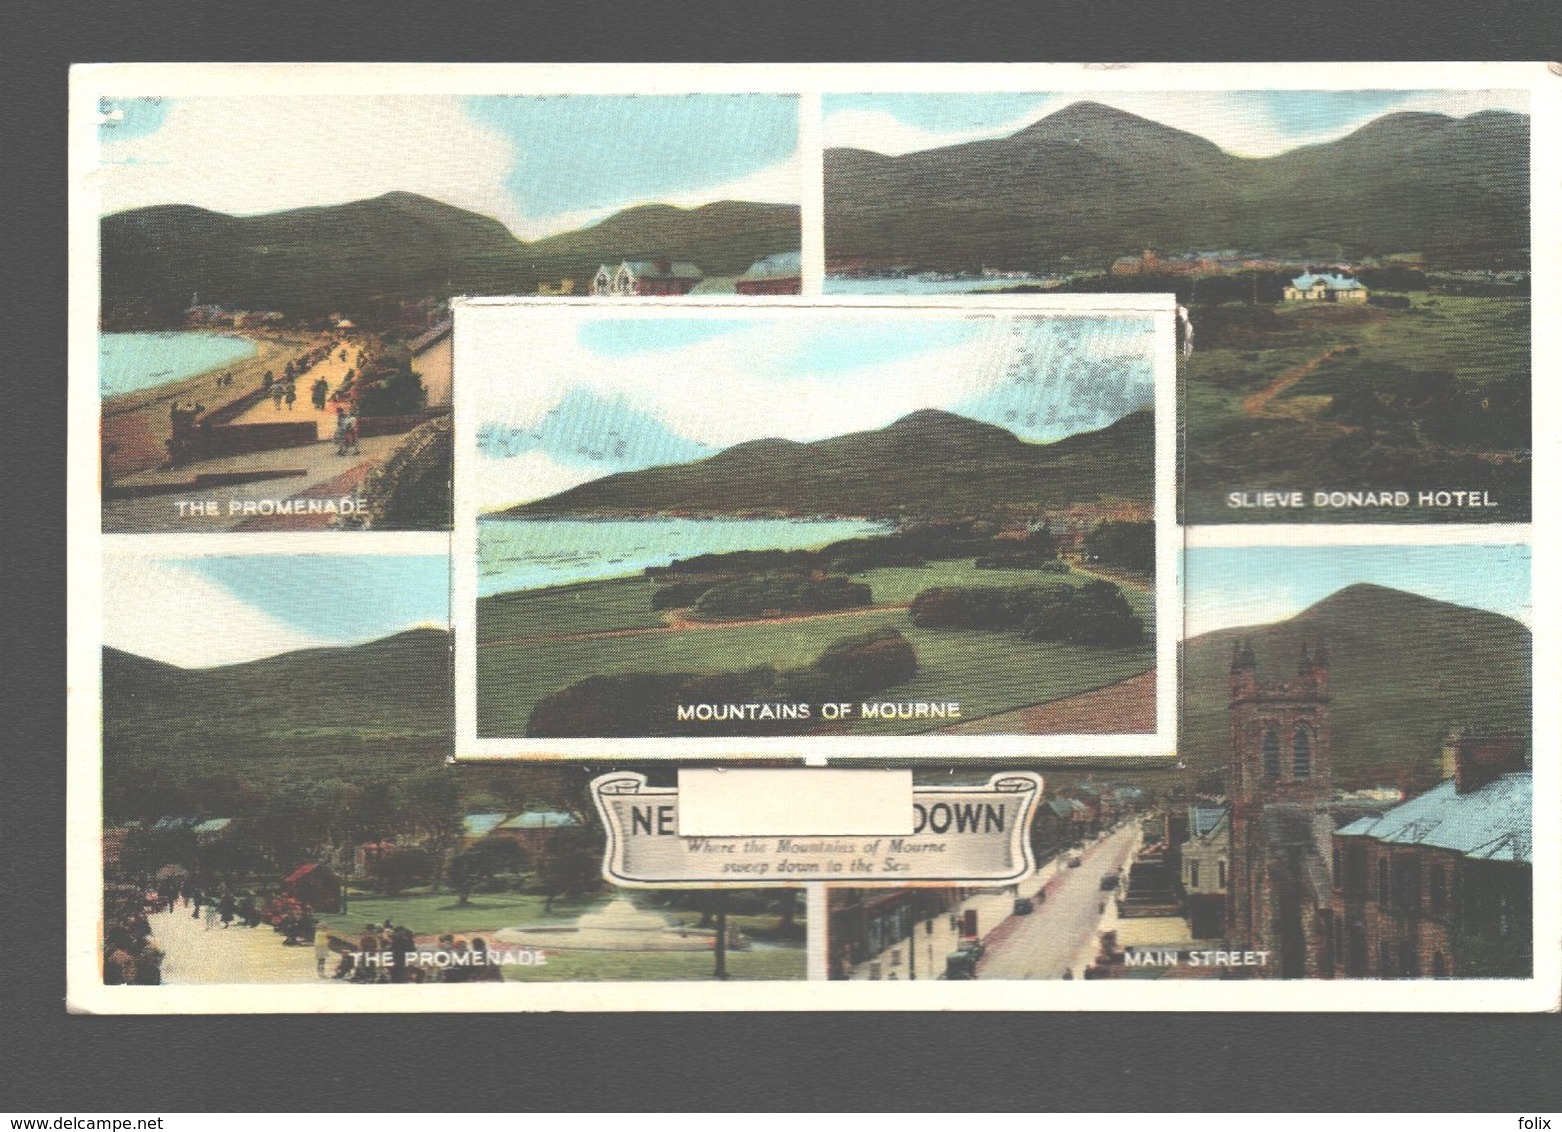 Newcastle Co. Down - Multiview With Folded Miniature Pictures - View Novelty - Down